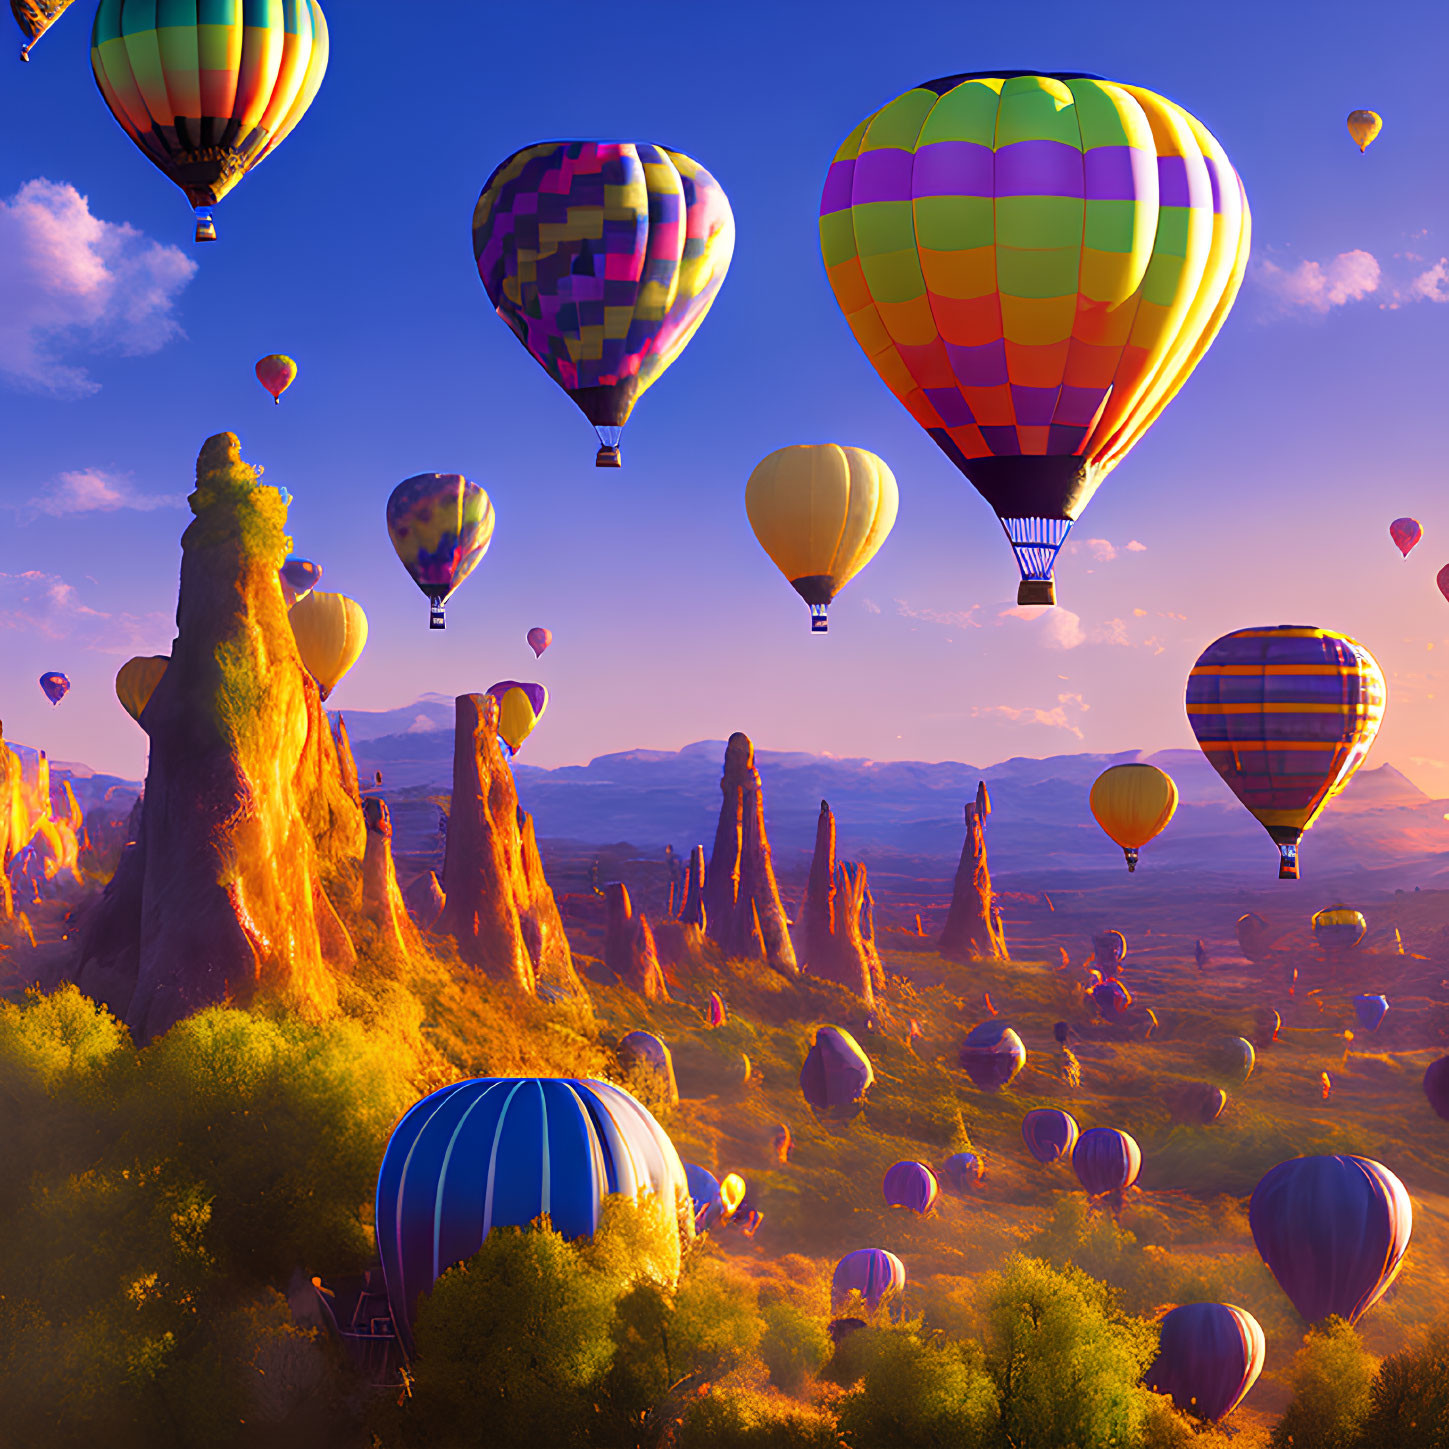 Vibrant hot air balloons over rocky landscape and blue sky